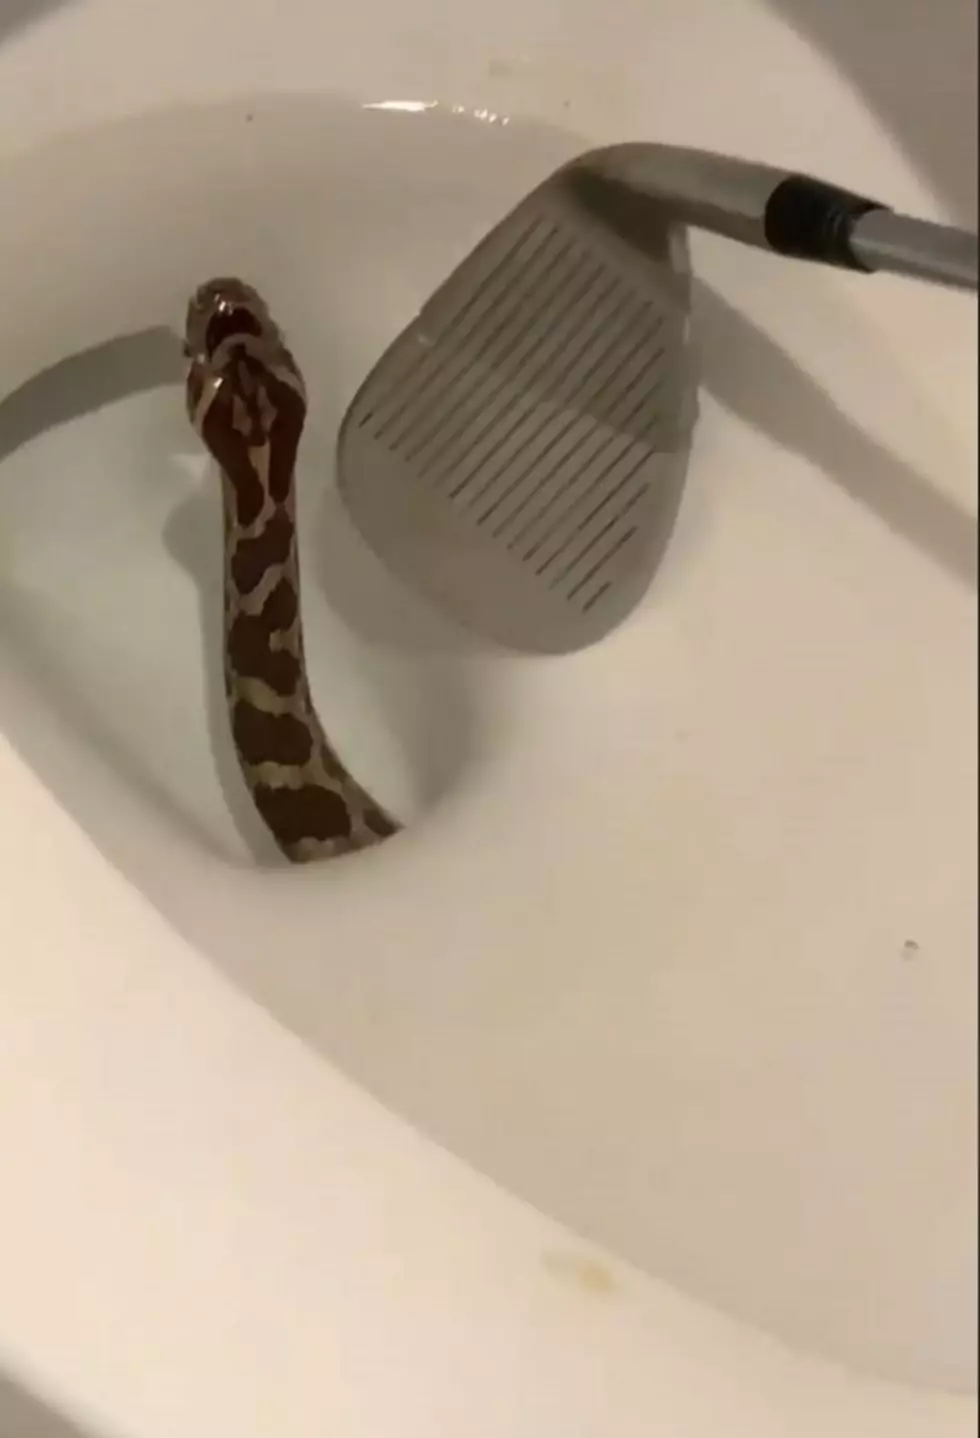 My Worst Nightmare Realized, Video Shows Snake Coming Out of a Texas Toilet